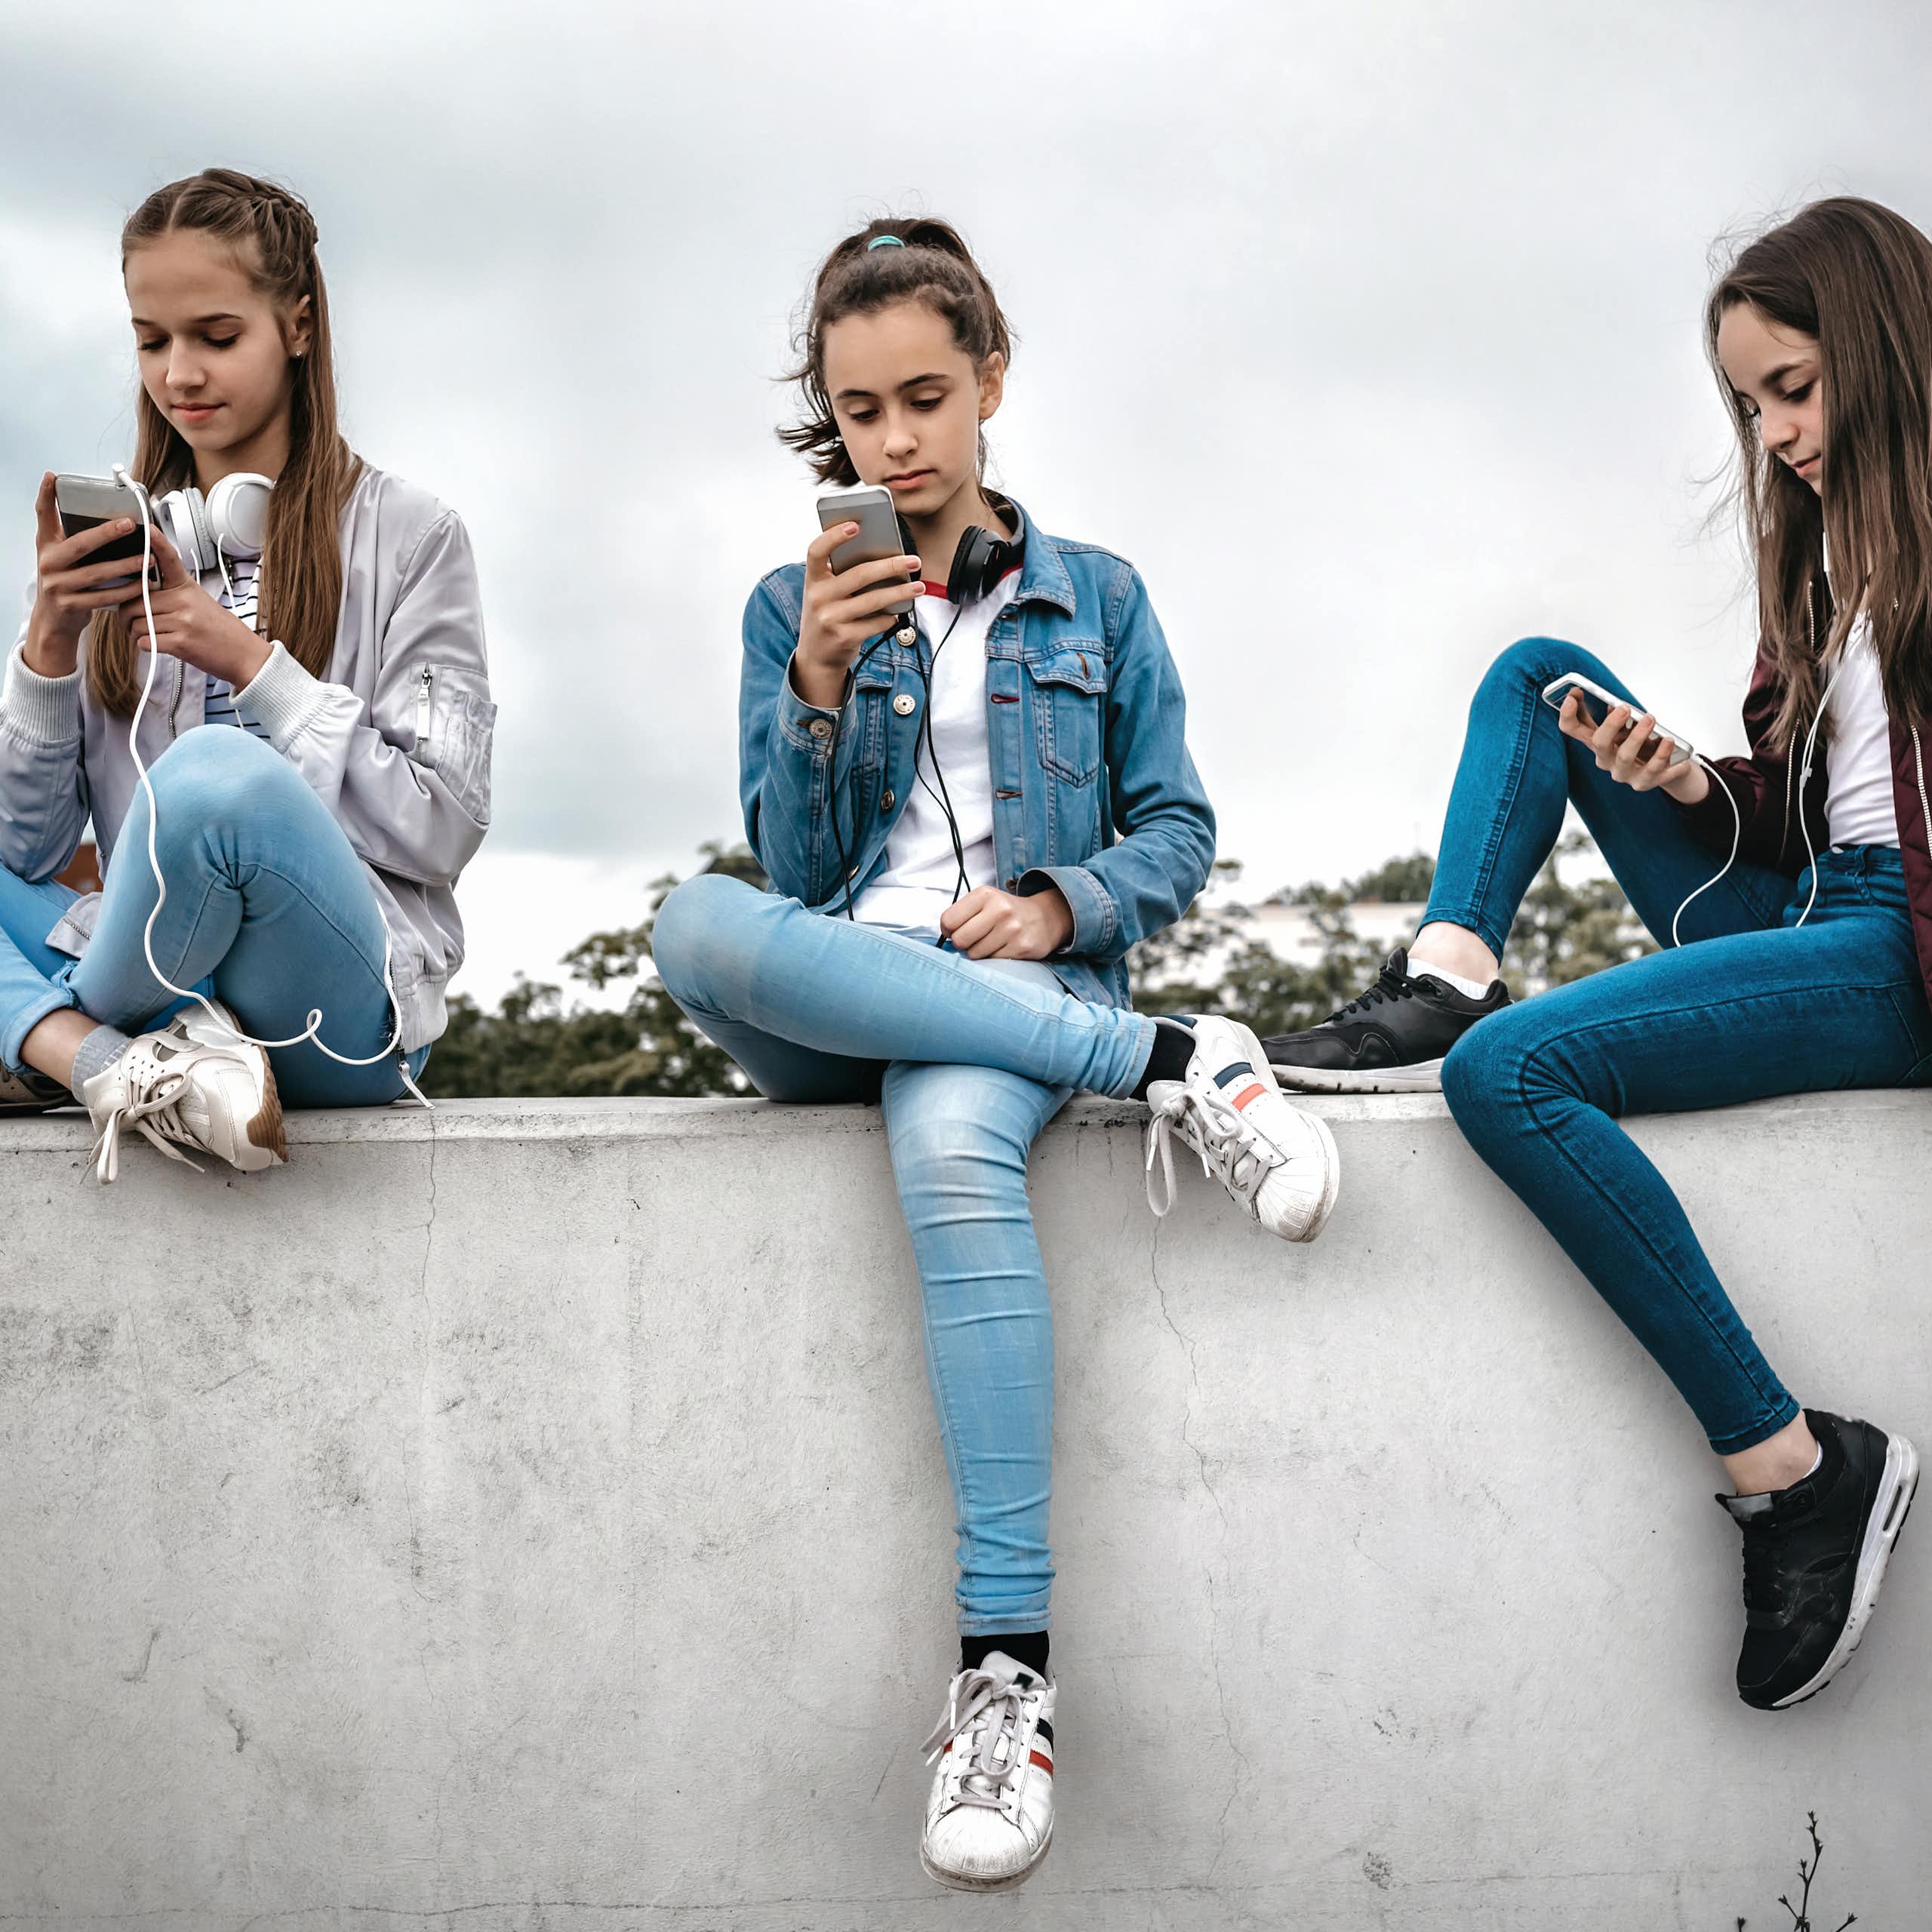 Three teenage girls sitting outdoors on concrete wall and looking at their smartphones.